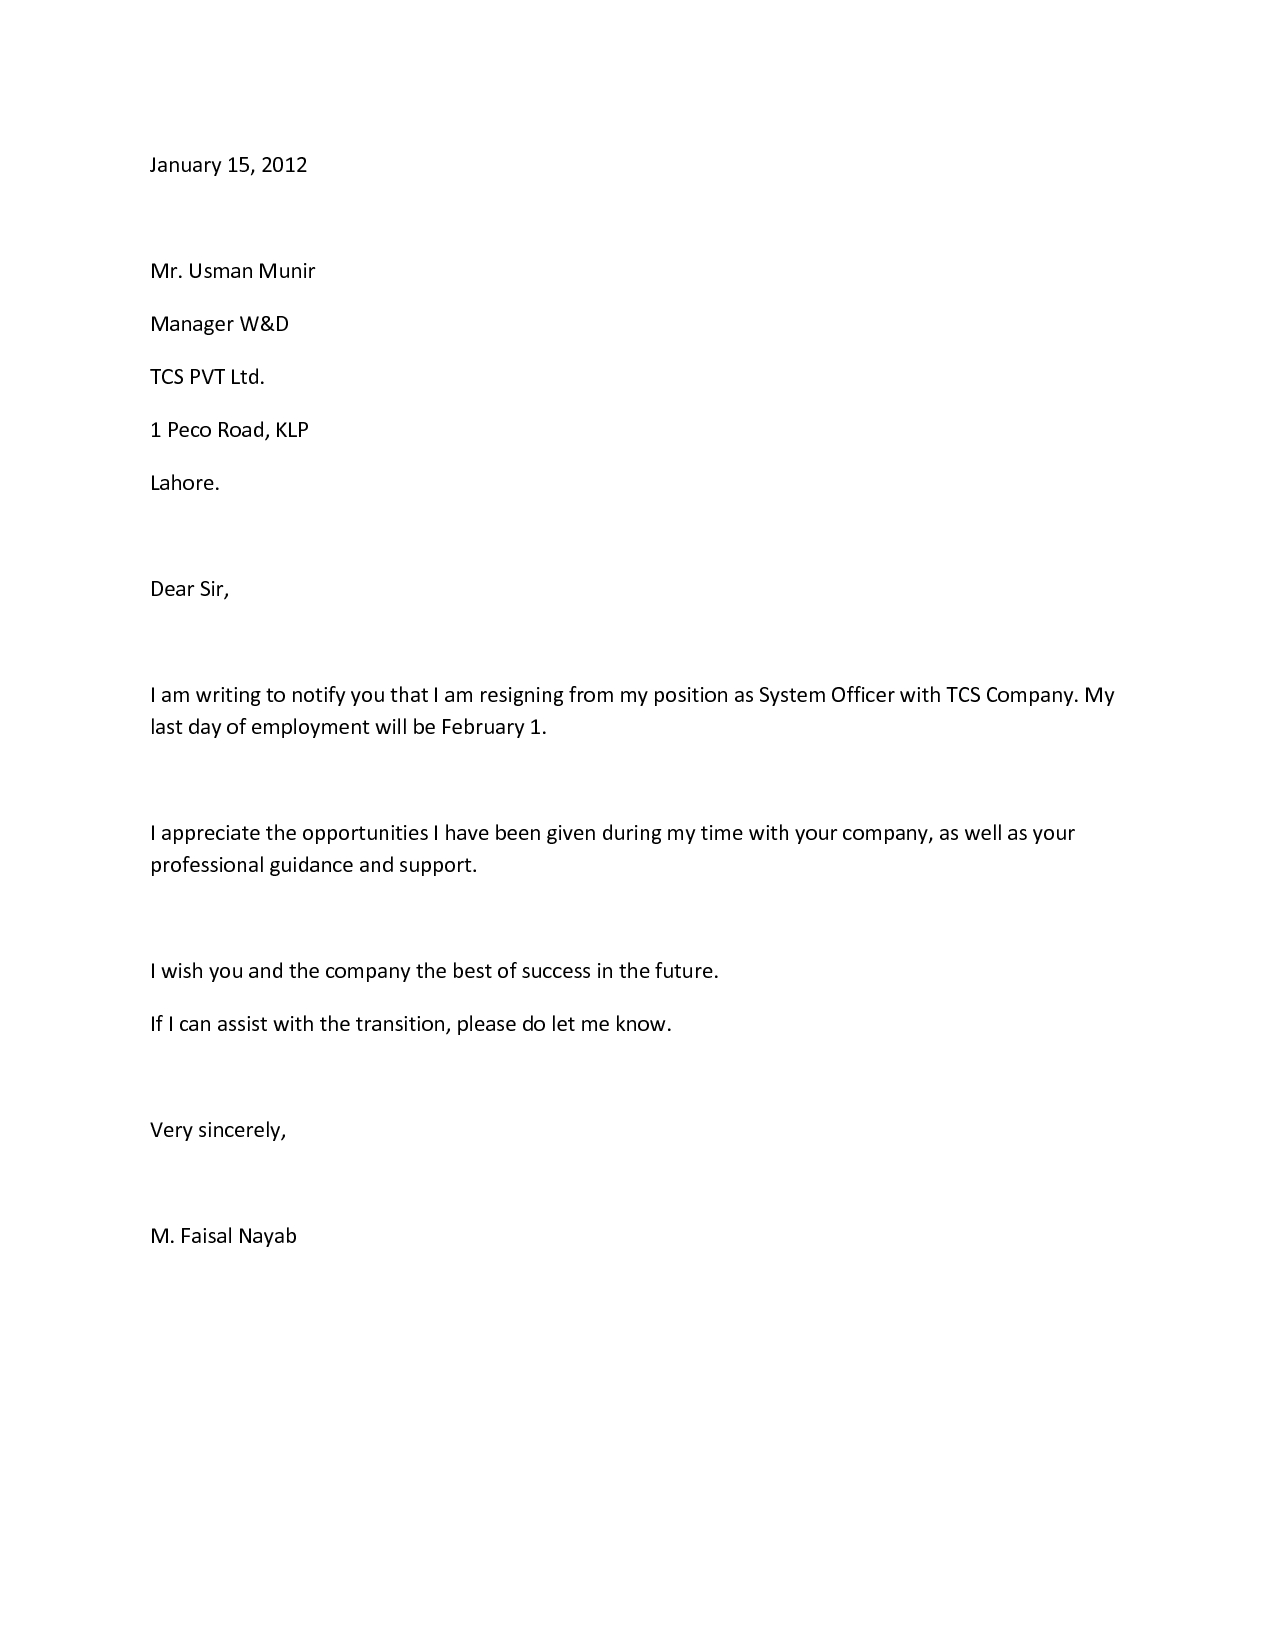 Resignation Letter format Template - How to Write A Proper Resignation Letter Images